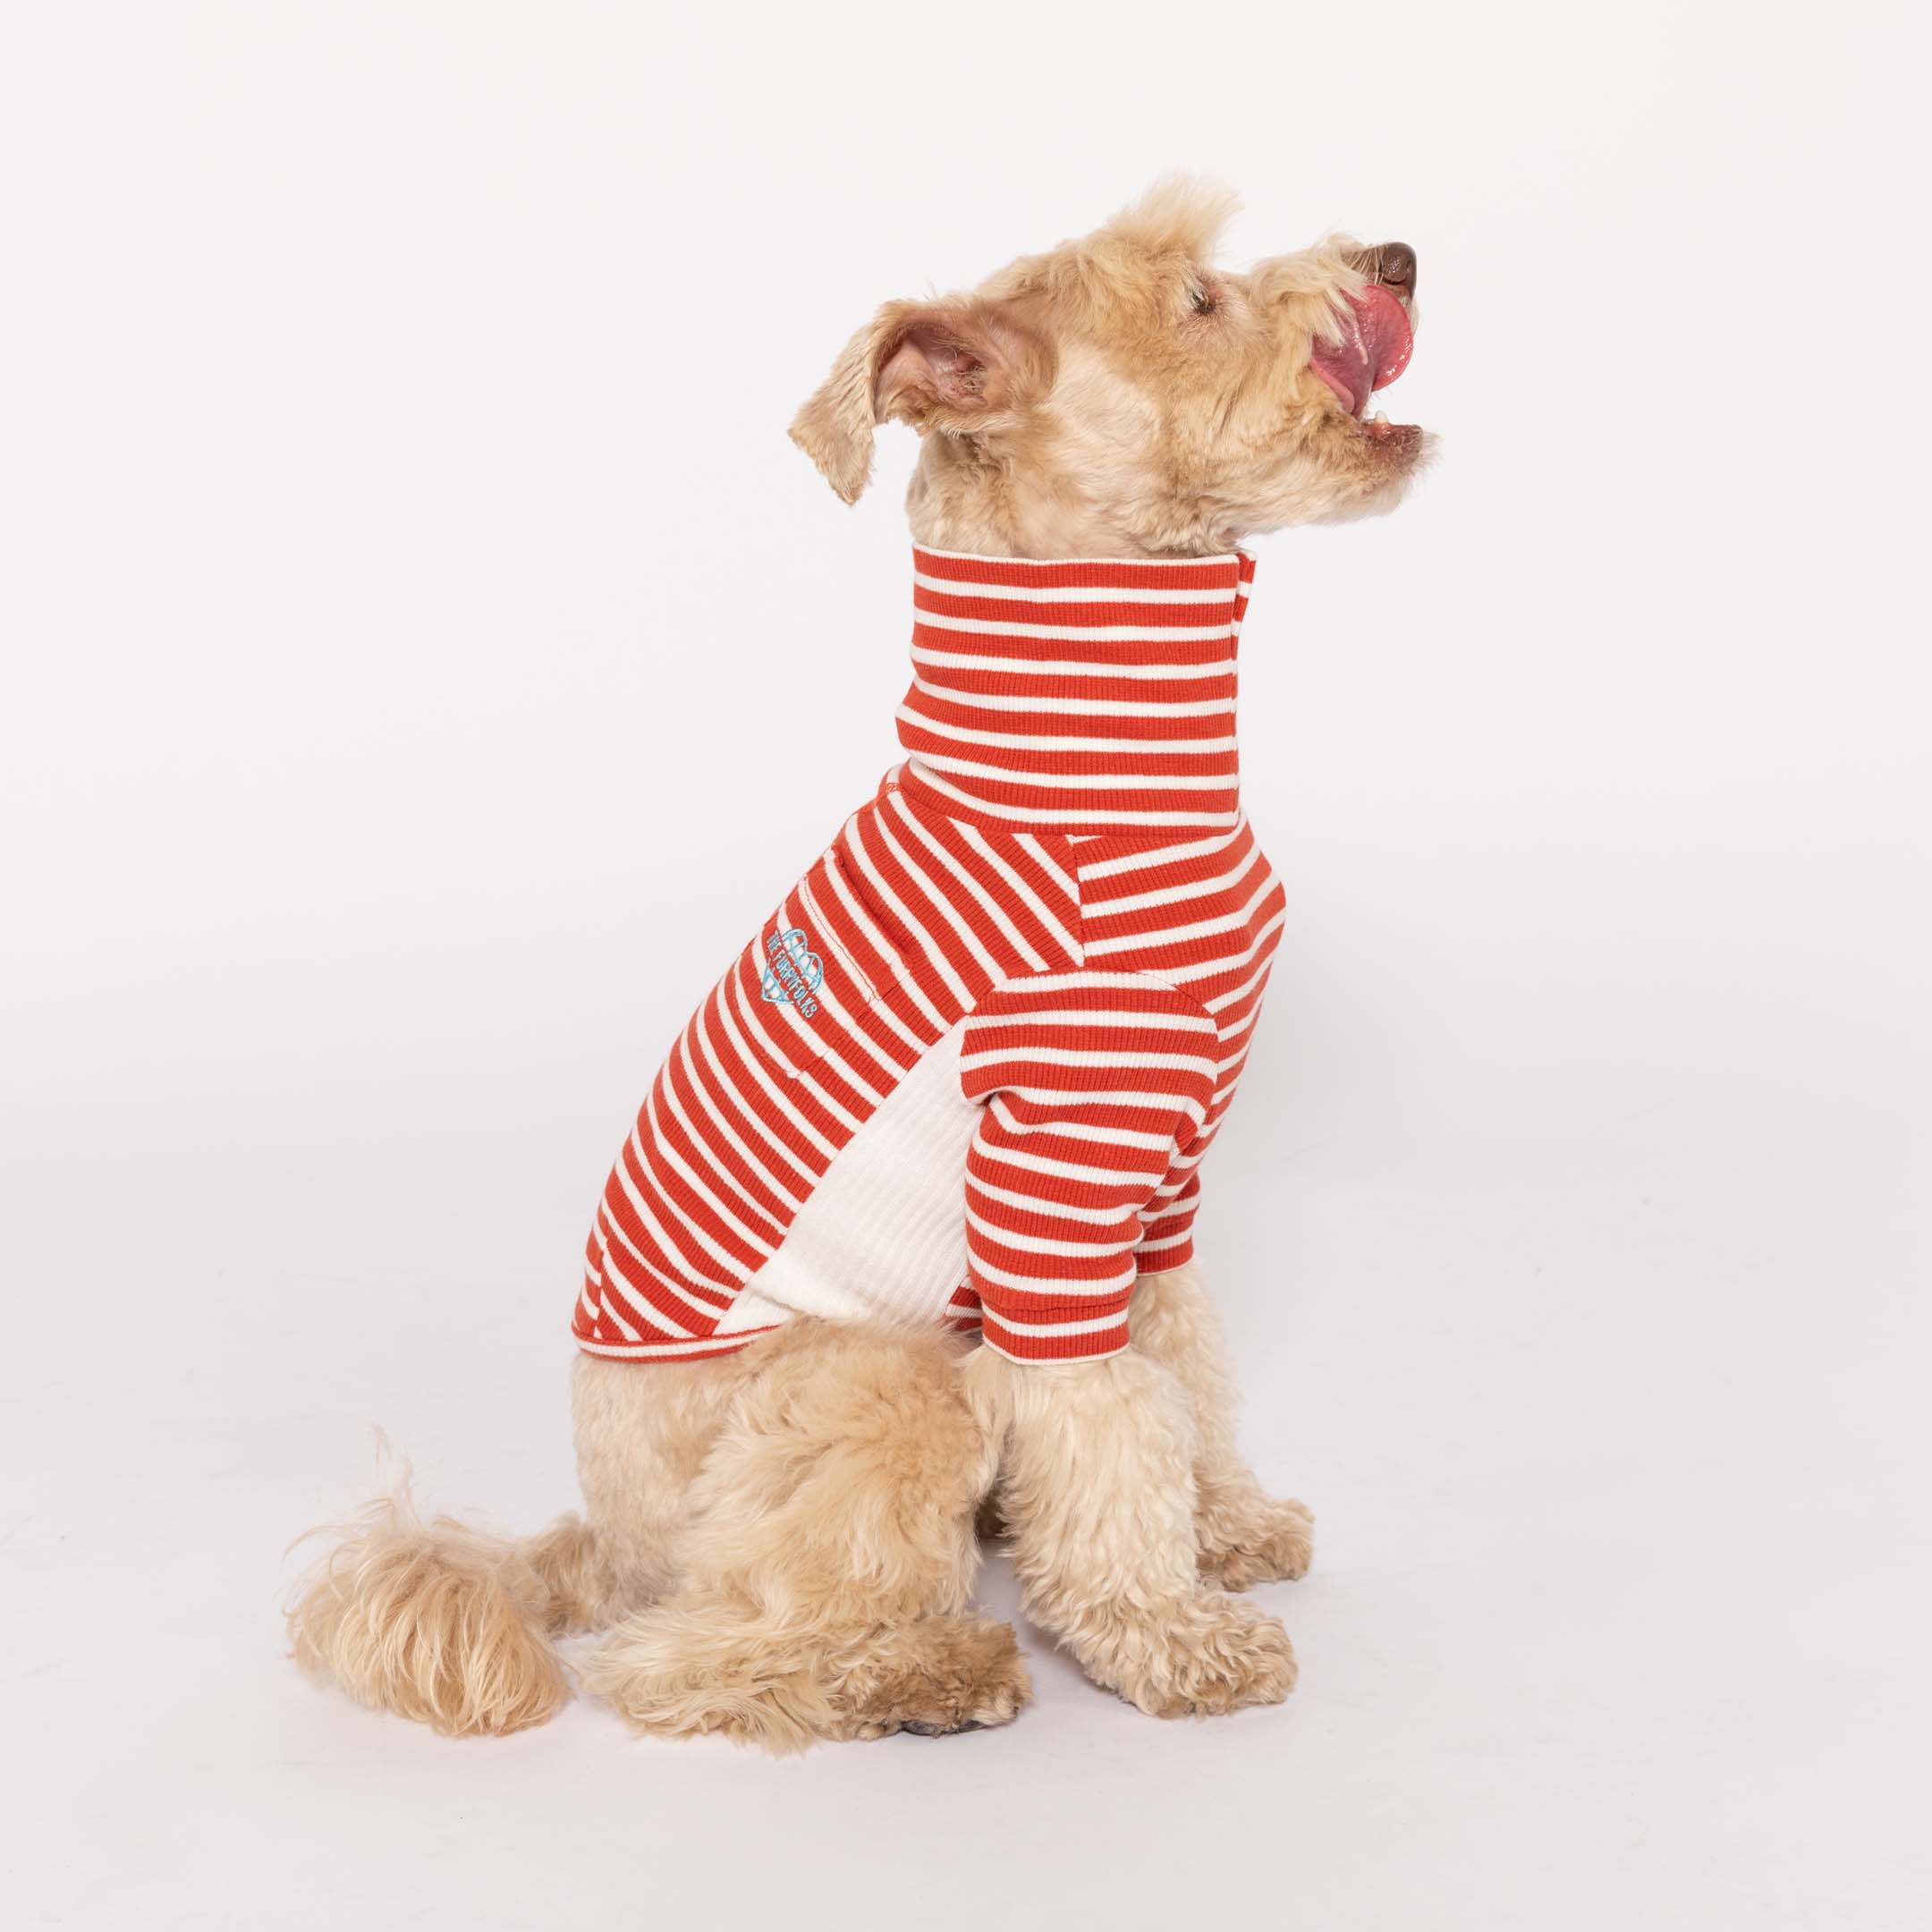 Adorable Schnauzer in a Rust & Ivory  striped turtleneck with a playful heart logo, posing with a cheerful expression.